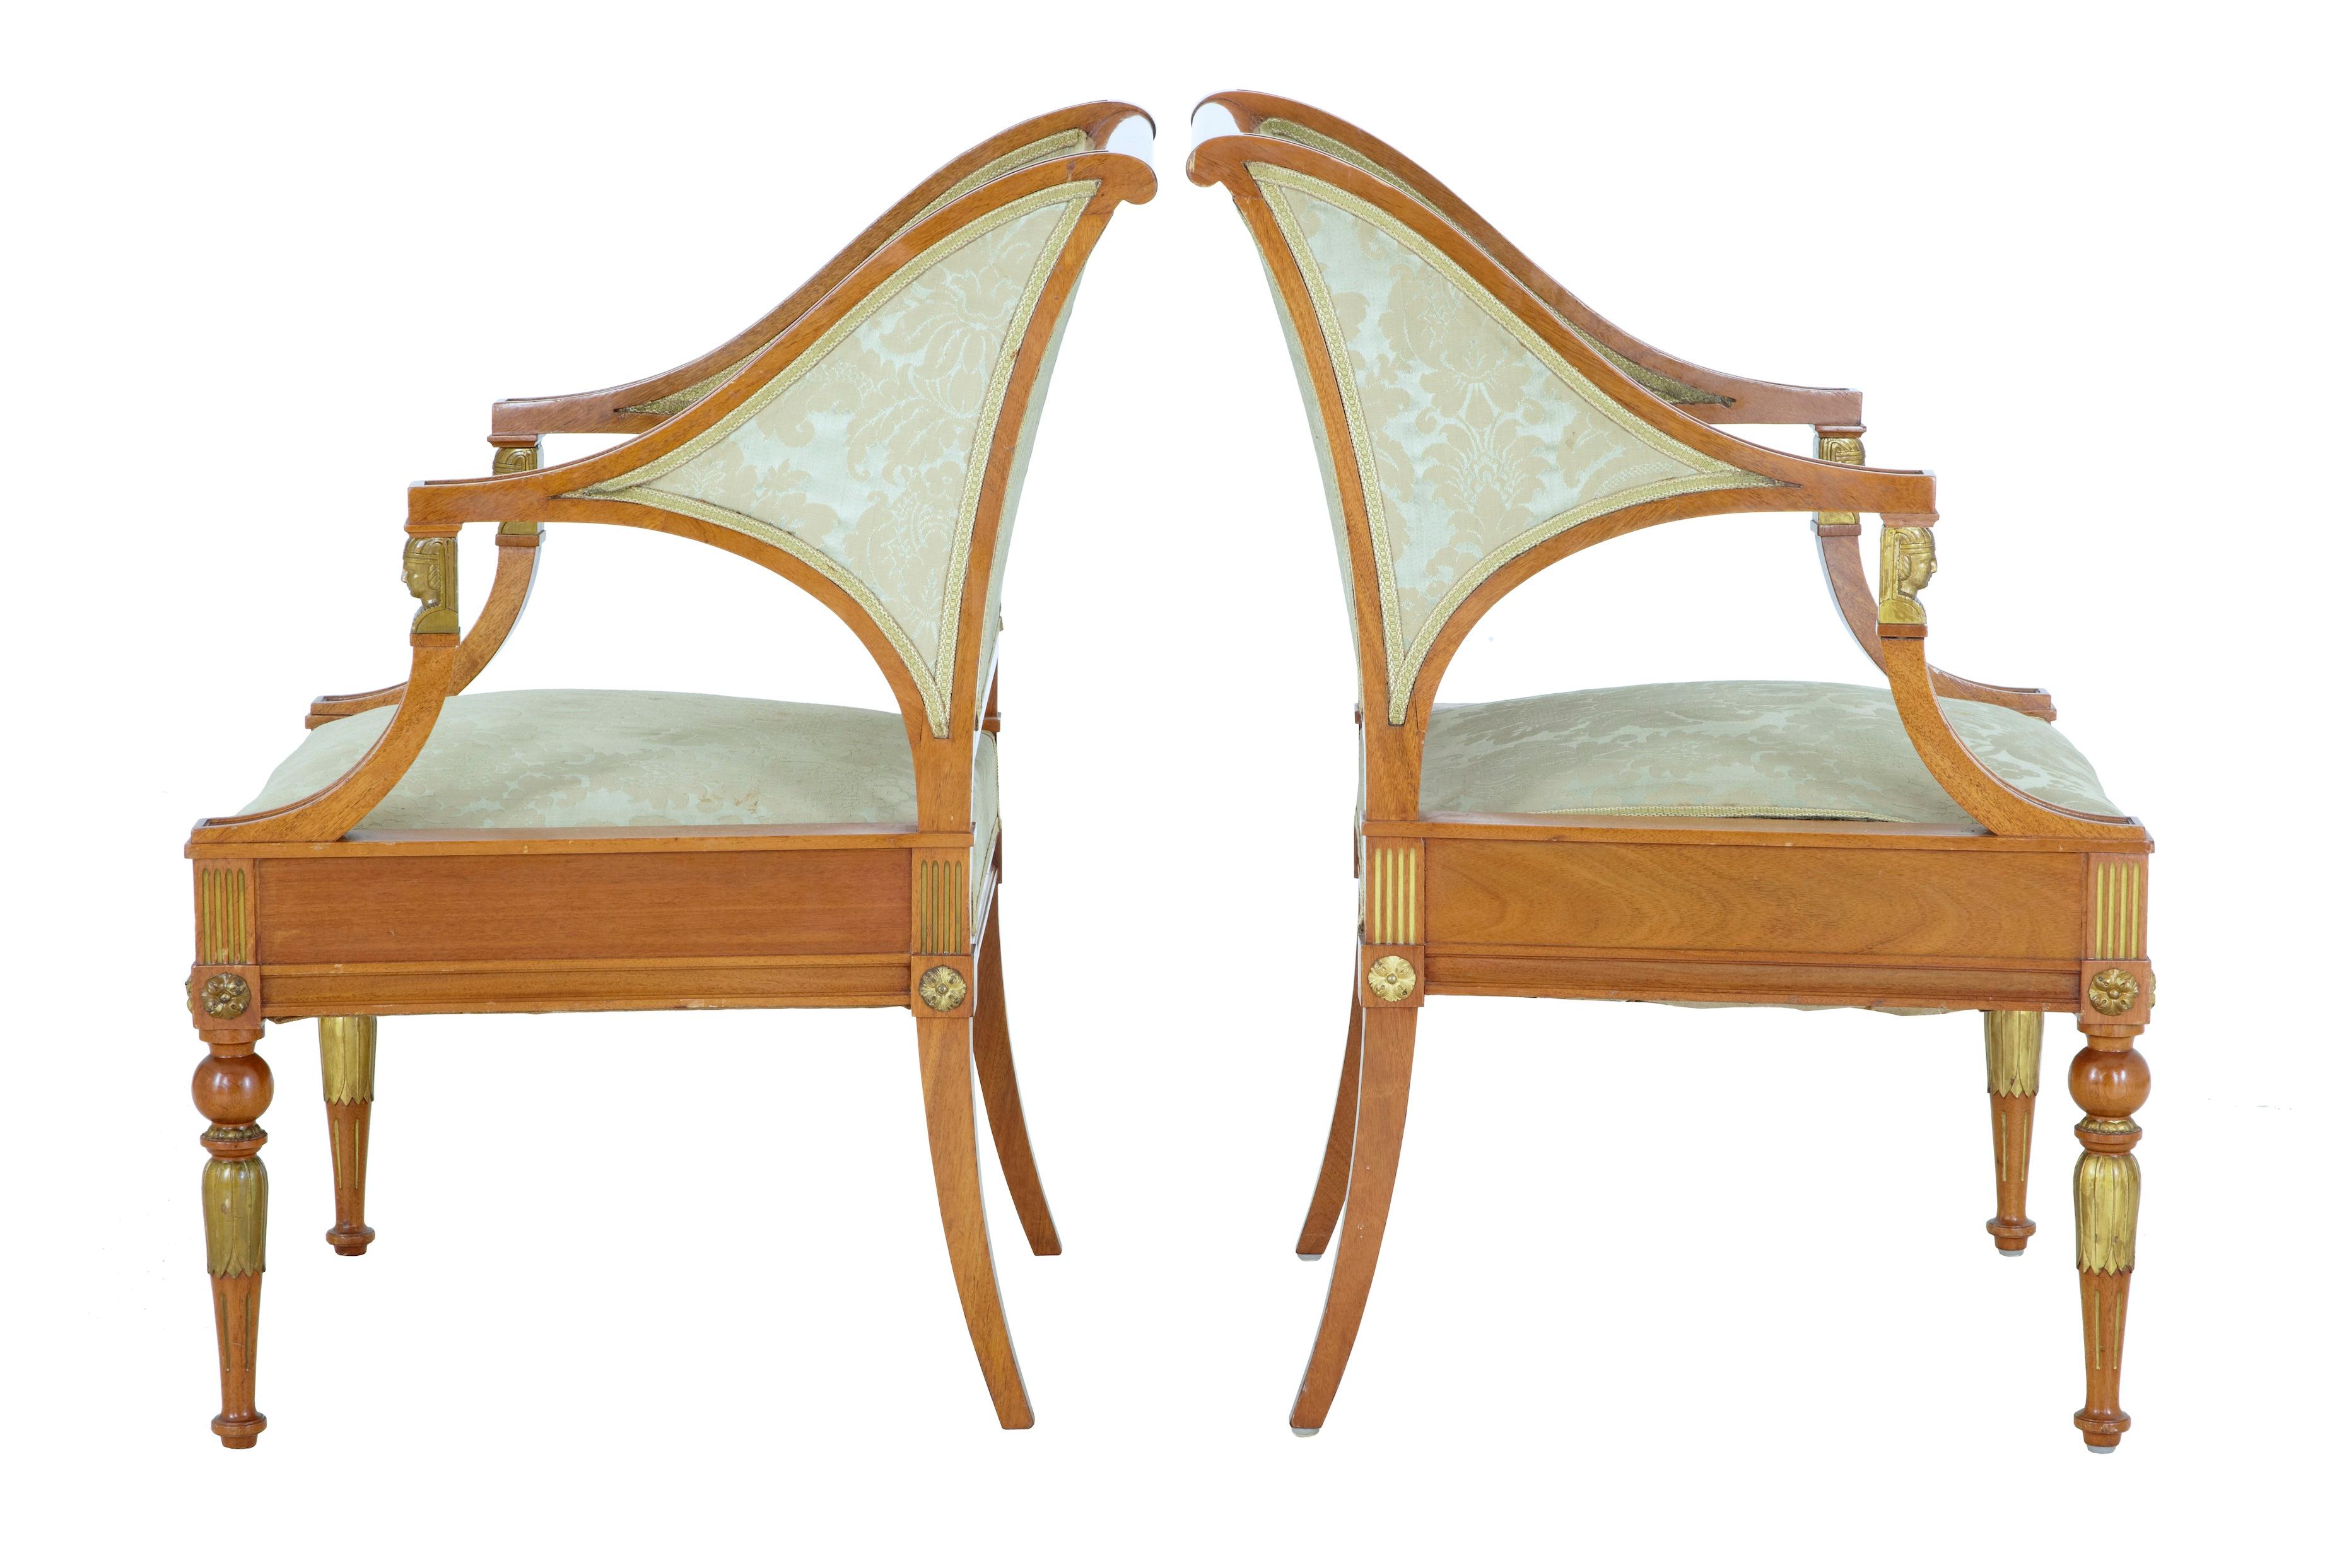 Well designed pair of 19th century armchairs, circa 1890.
Very much in the Empire taste, with shaped arms that lead down to ormolu Egyptian mounts.
Applied roundels to the top of the legs and carved gilt leaf detail.

Fabric with some staining